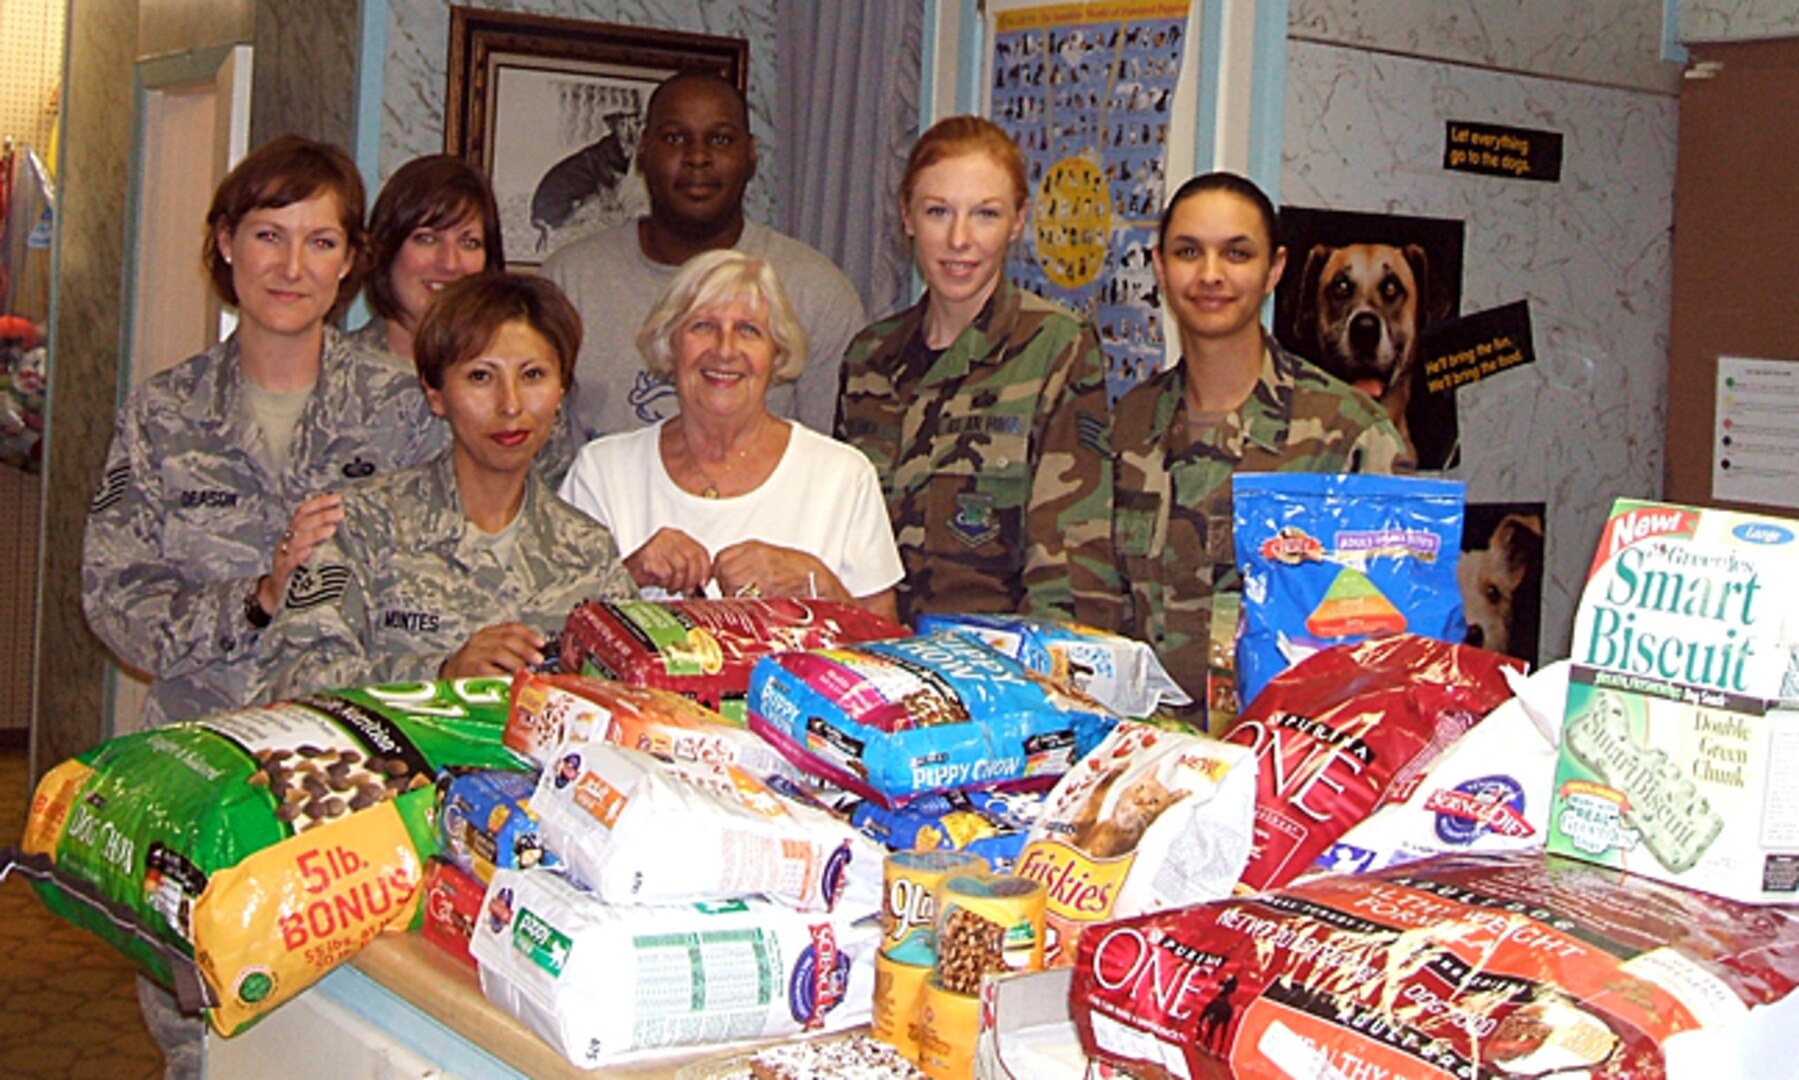 Members of the Air Force Personnel Center Junior Enlisted Council show off some of the donations raised recently to support the Universal City Animal Shelter. The council raised 756 pounds of food, 224 pounds of cat litter, 16 pounds of treats and $155. Front row, from left: Tech. Sgt. Sara Montes and Aina Blake; back row, from left: Tech. Sgt. Sandra Deason, Staff Sgt. Tonya Posey, Sharod White, Staff Sgt. Simona Patrick and Senior Airman Janina-Eva White. (Courtesy photo)